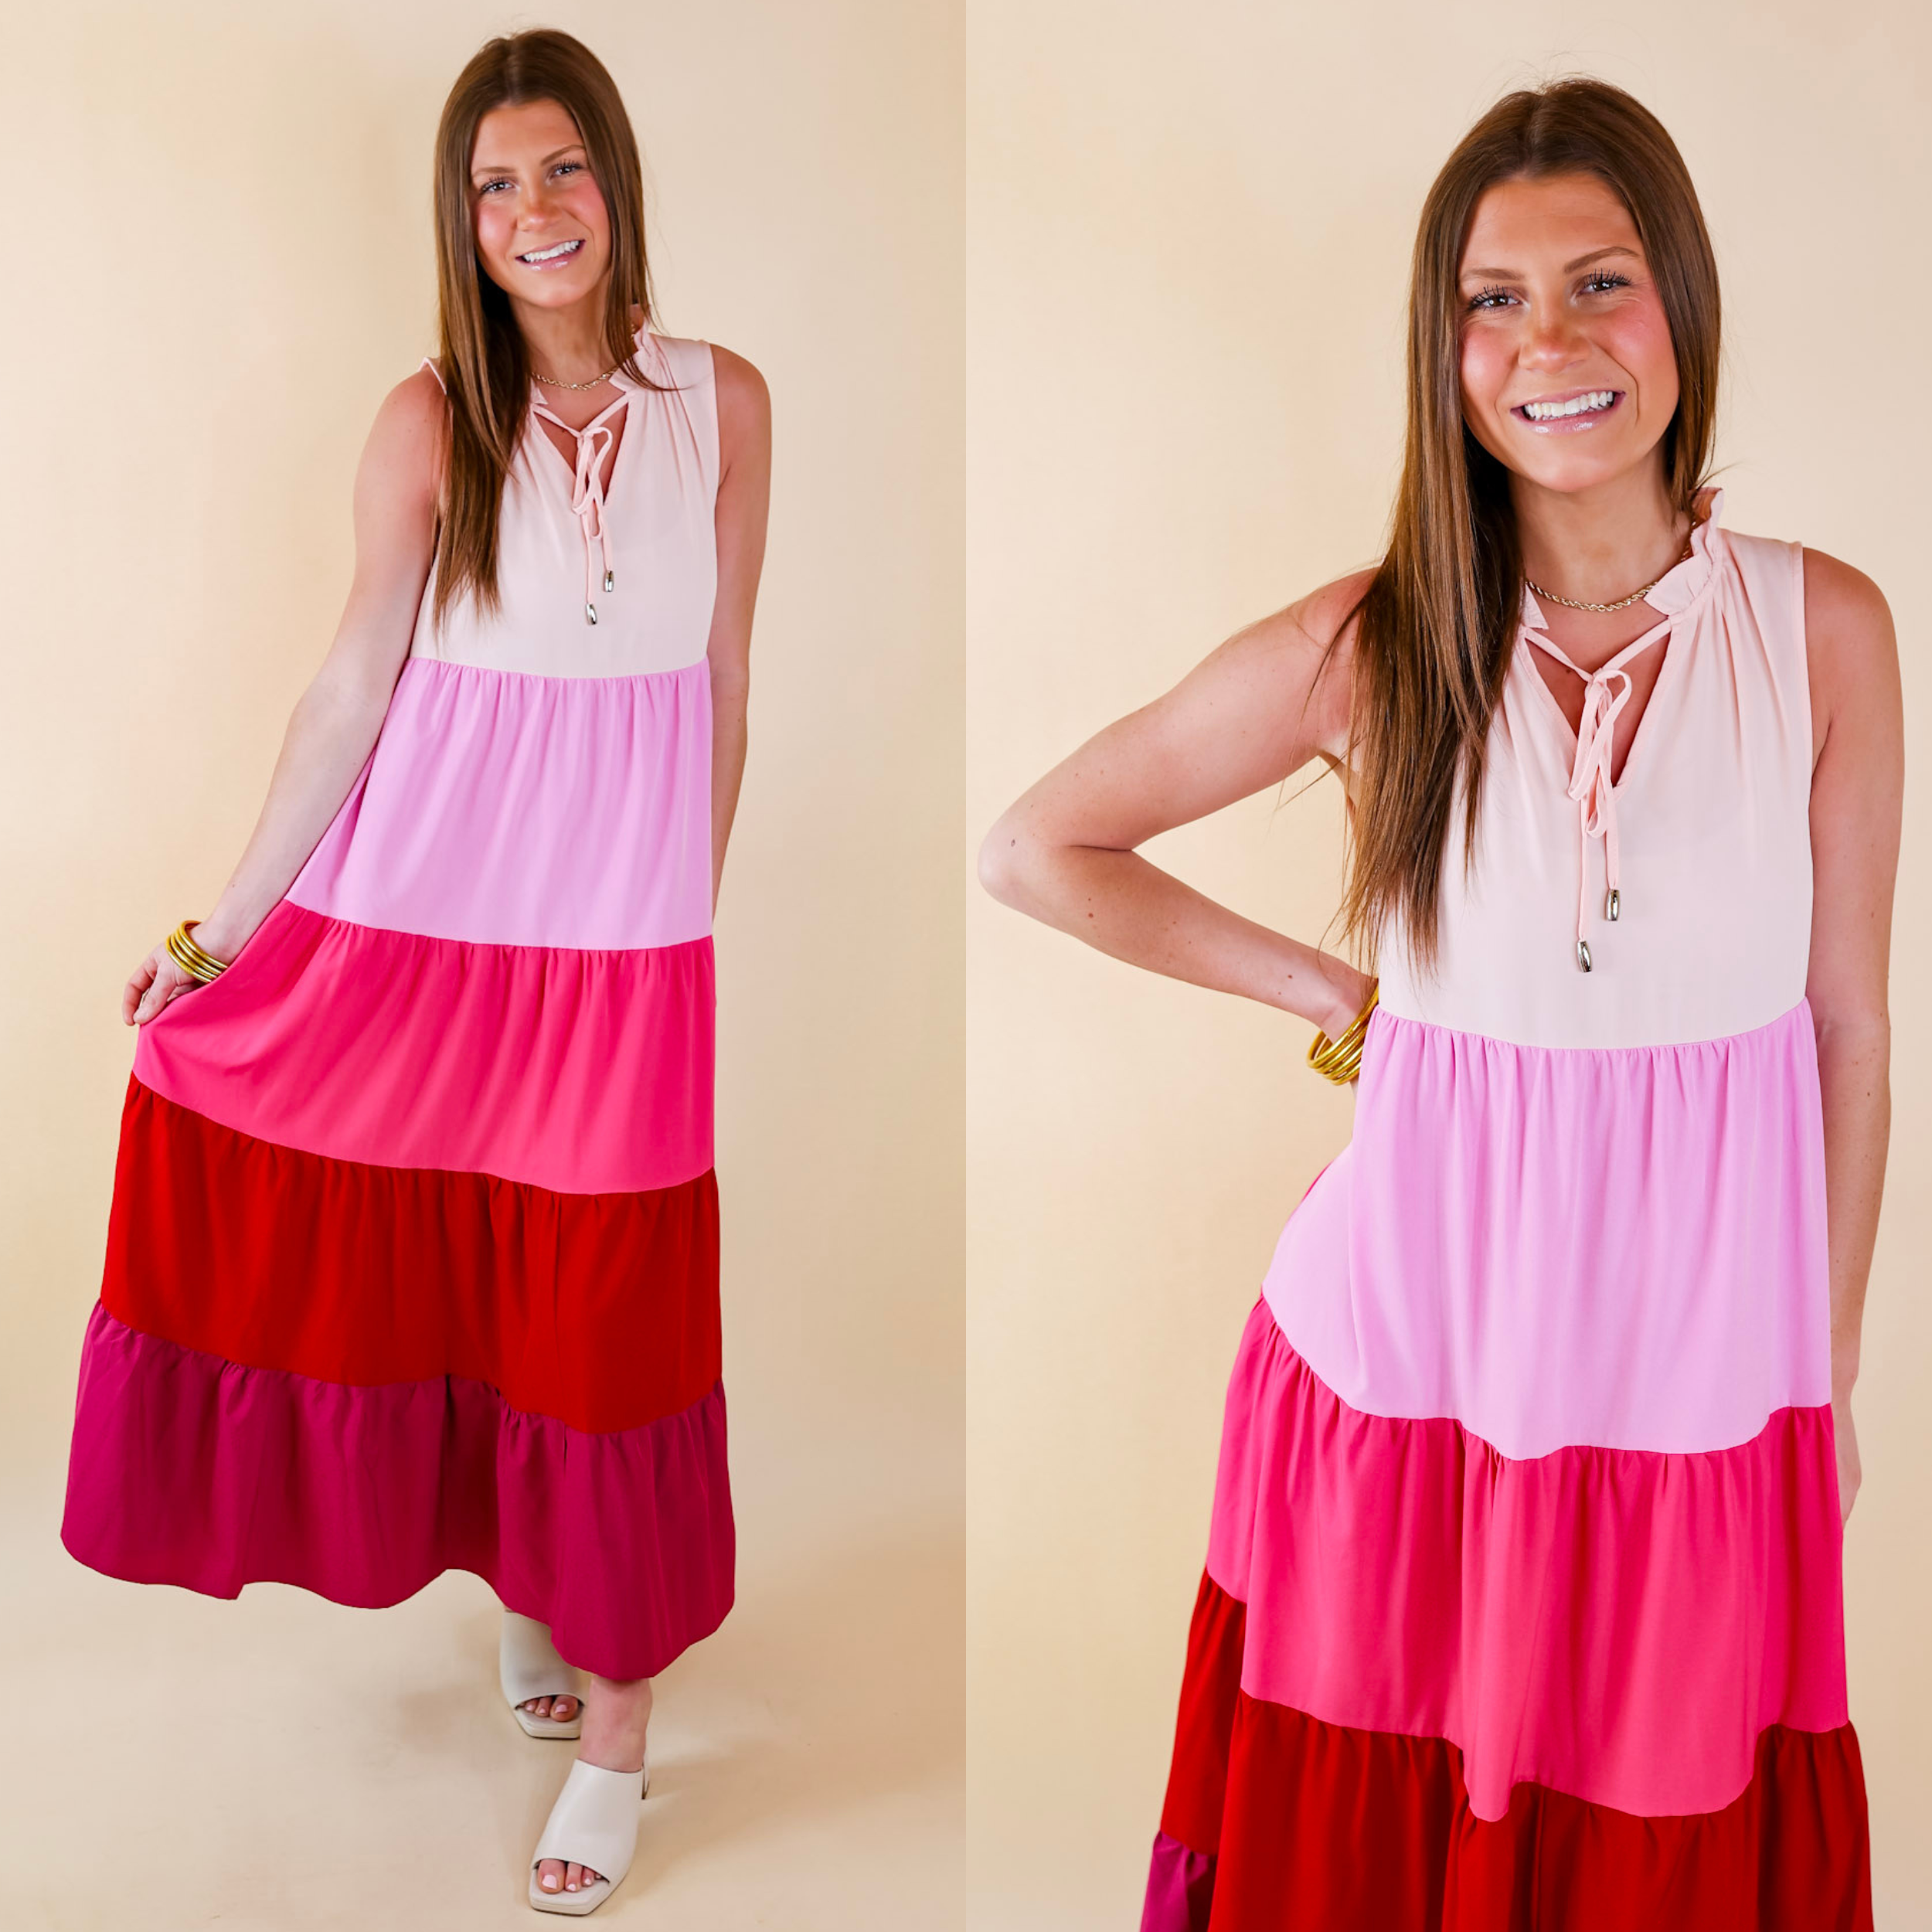 Model is wearing a tank top maxi dress that is tiered in light pink, medium pink, hot pink, and red. Model has it paired with ivory heels and gold jewelry.